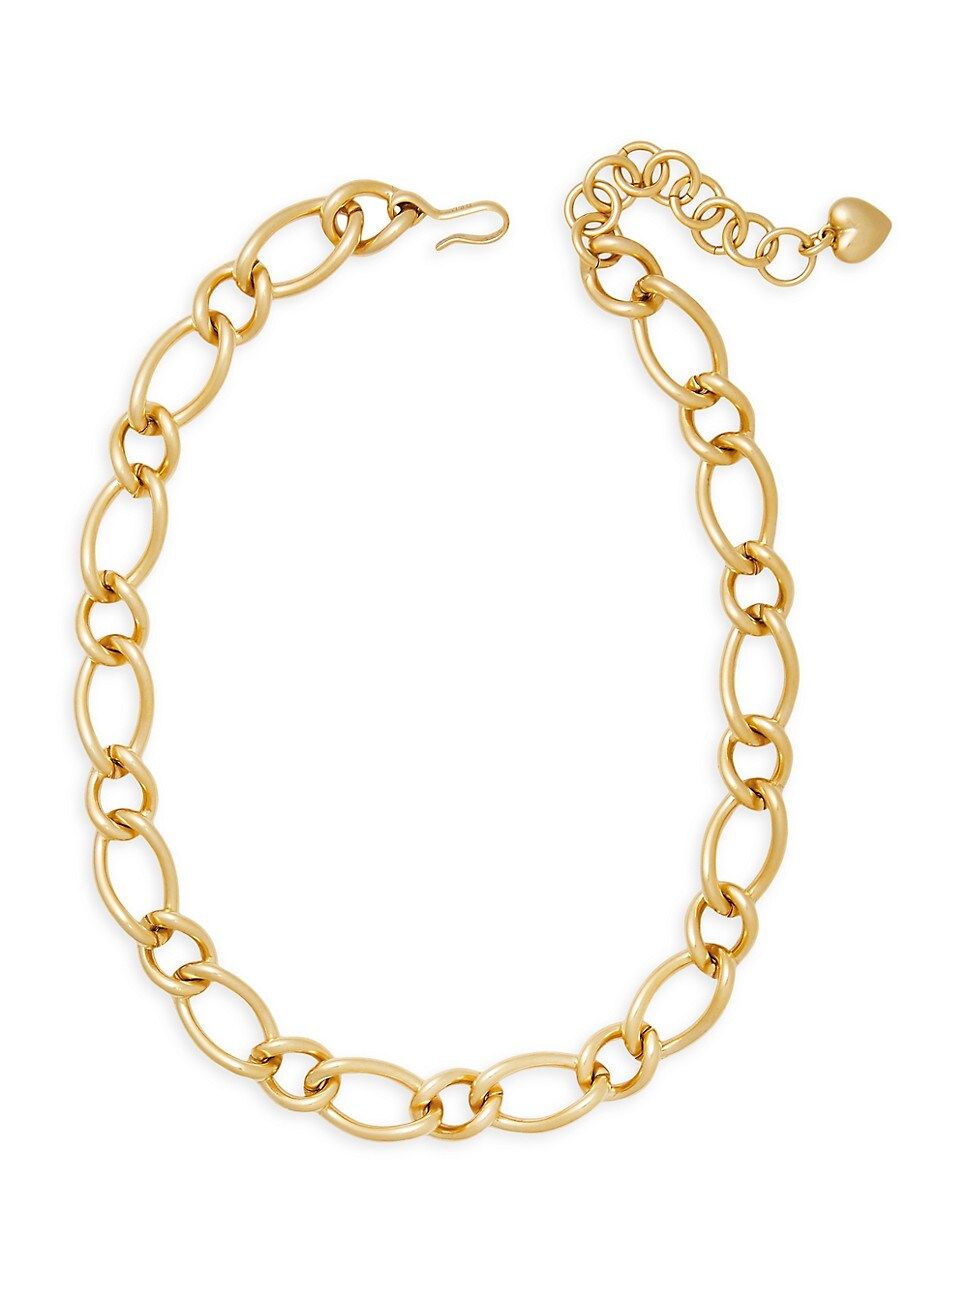 Mabel 24K-Gold-Plated Chain Necklace | Saks Fifth Avenue